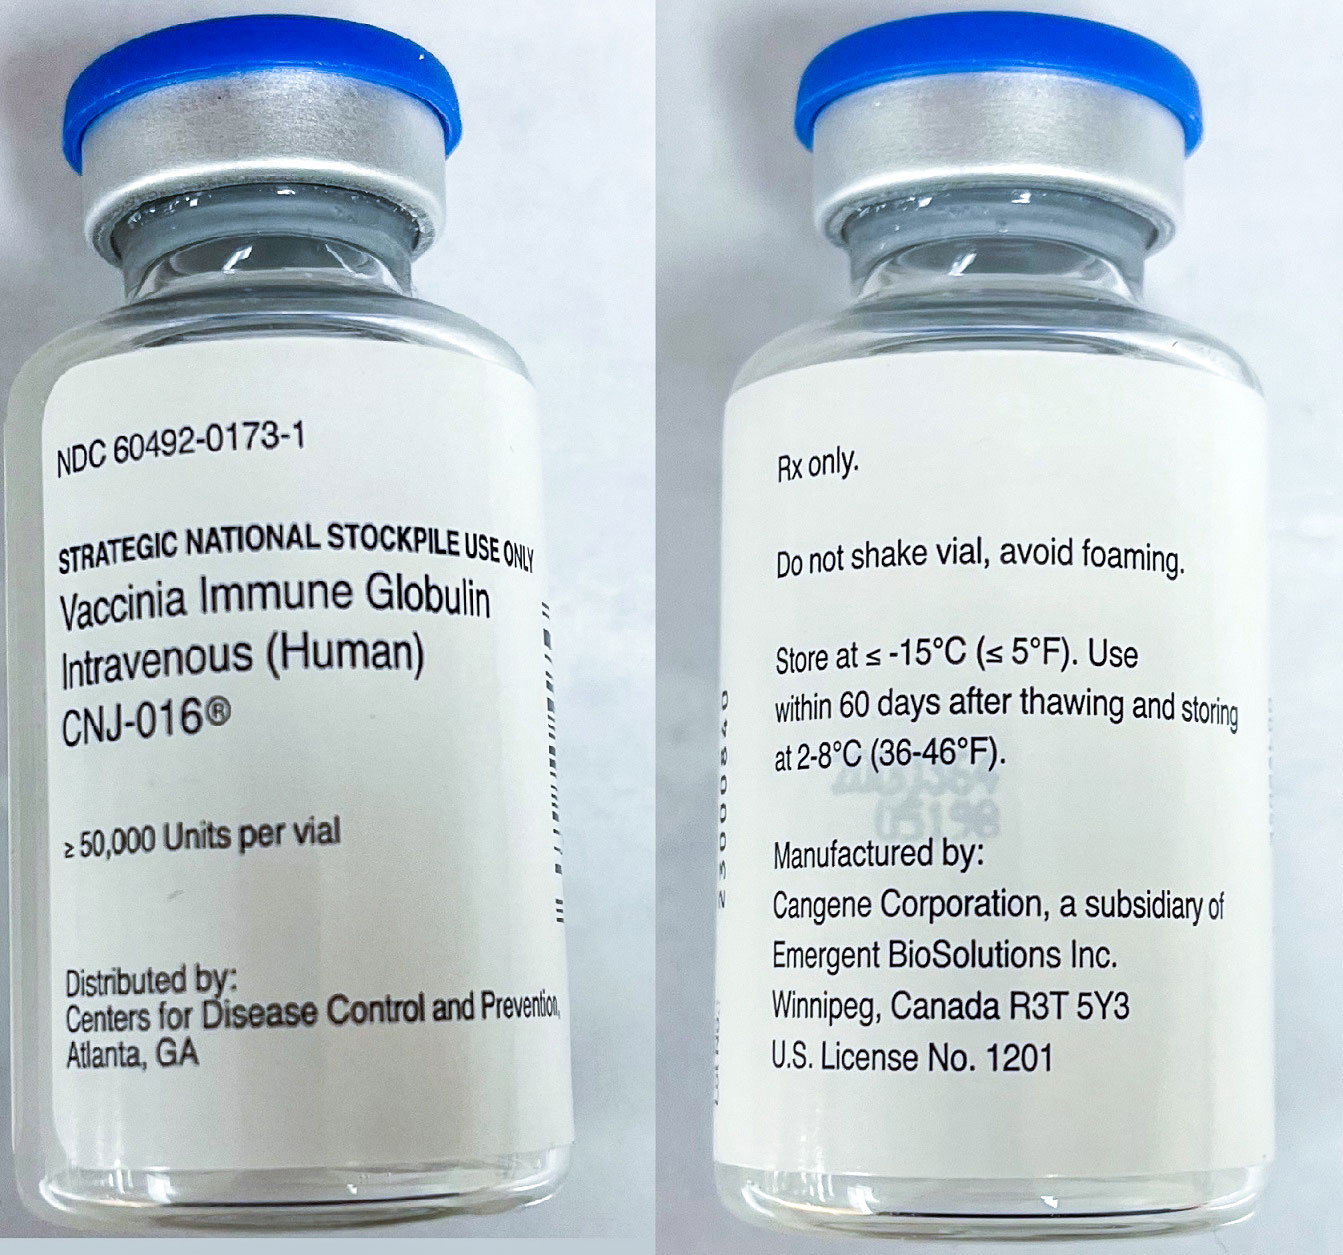 The vaccinia immune globulin intravenous (human) CNJ-016 vial label displays greater than or equal to 50,000 units per vial, without a corresponding volume or concentration.